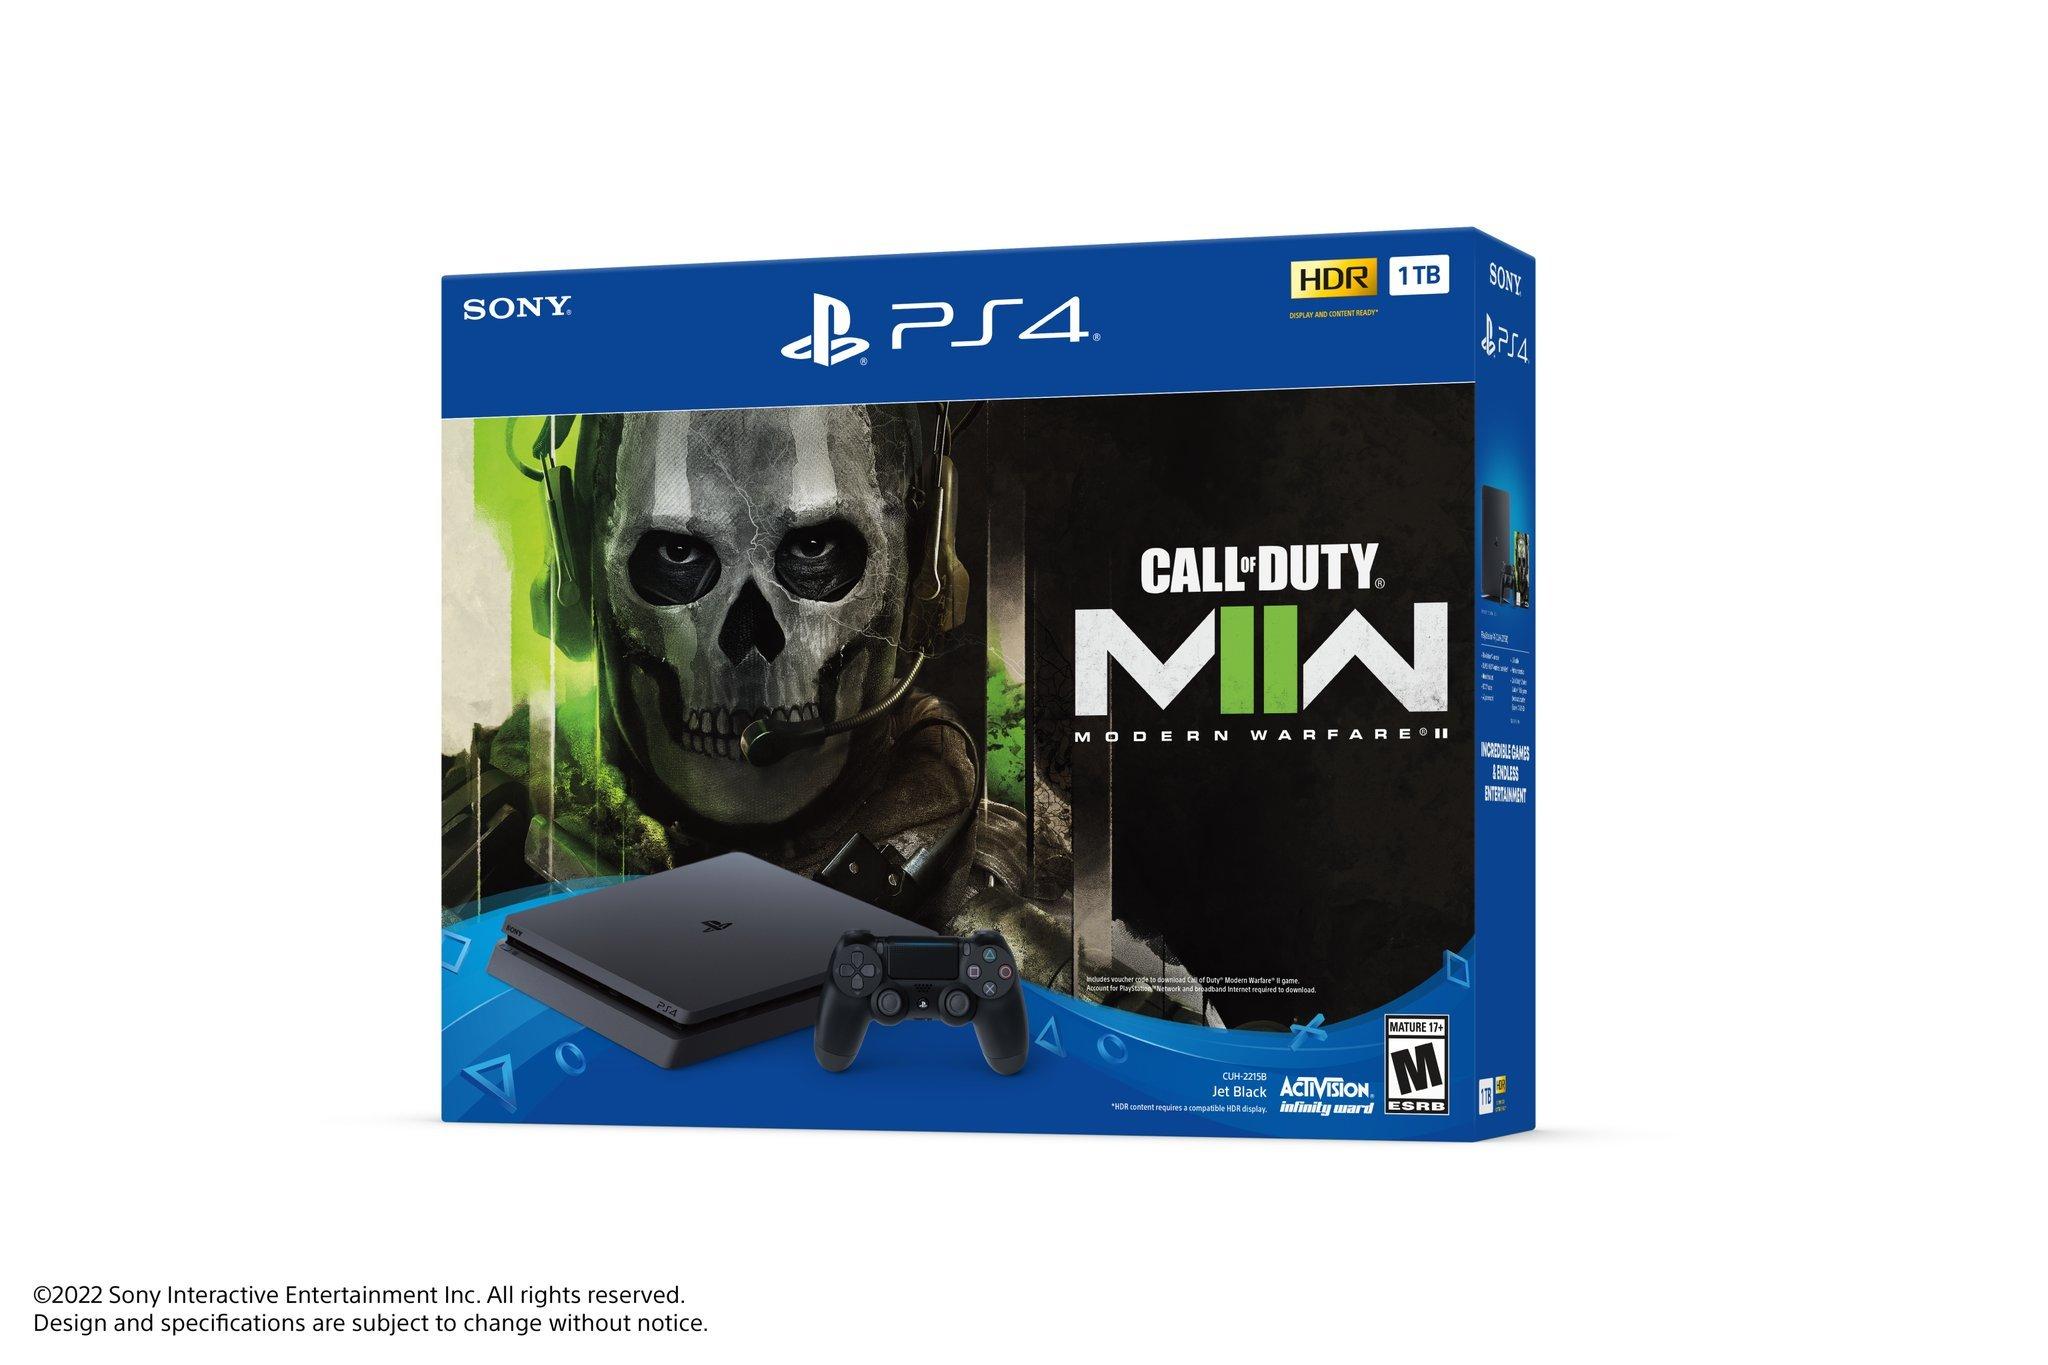 PS4 500GB With COD MW 2 (Voucher), GT 7 And Horizon Forbidden West